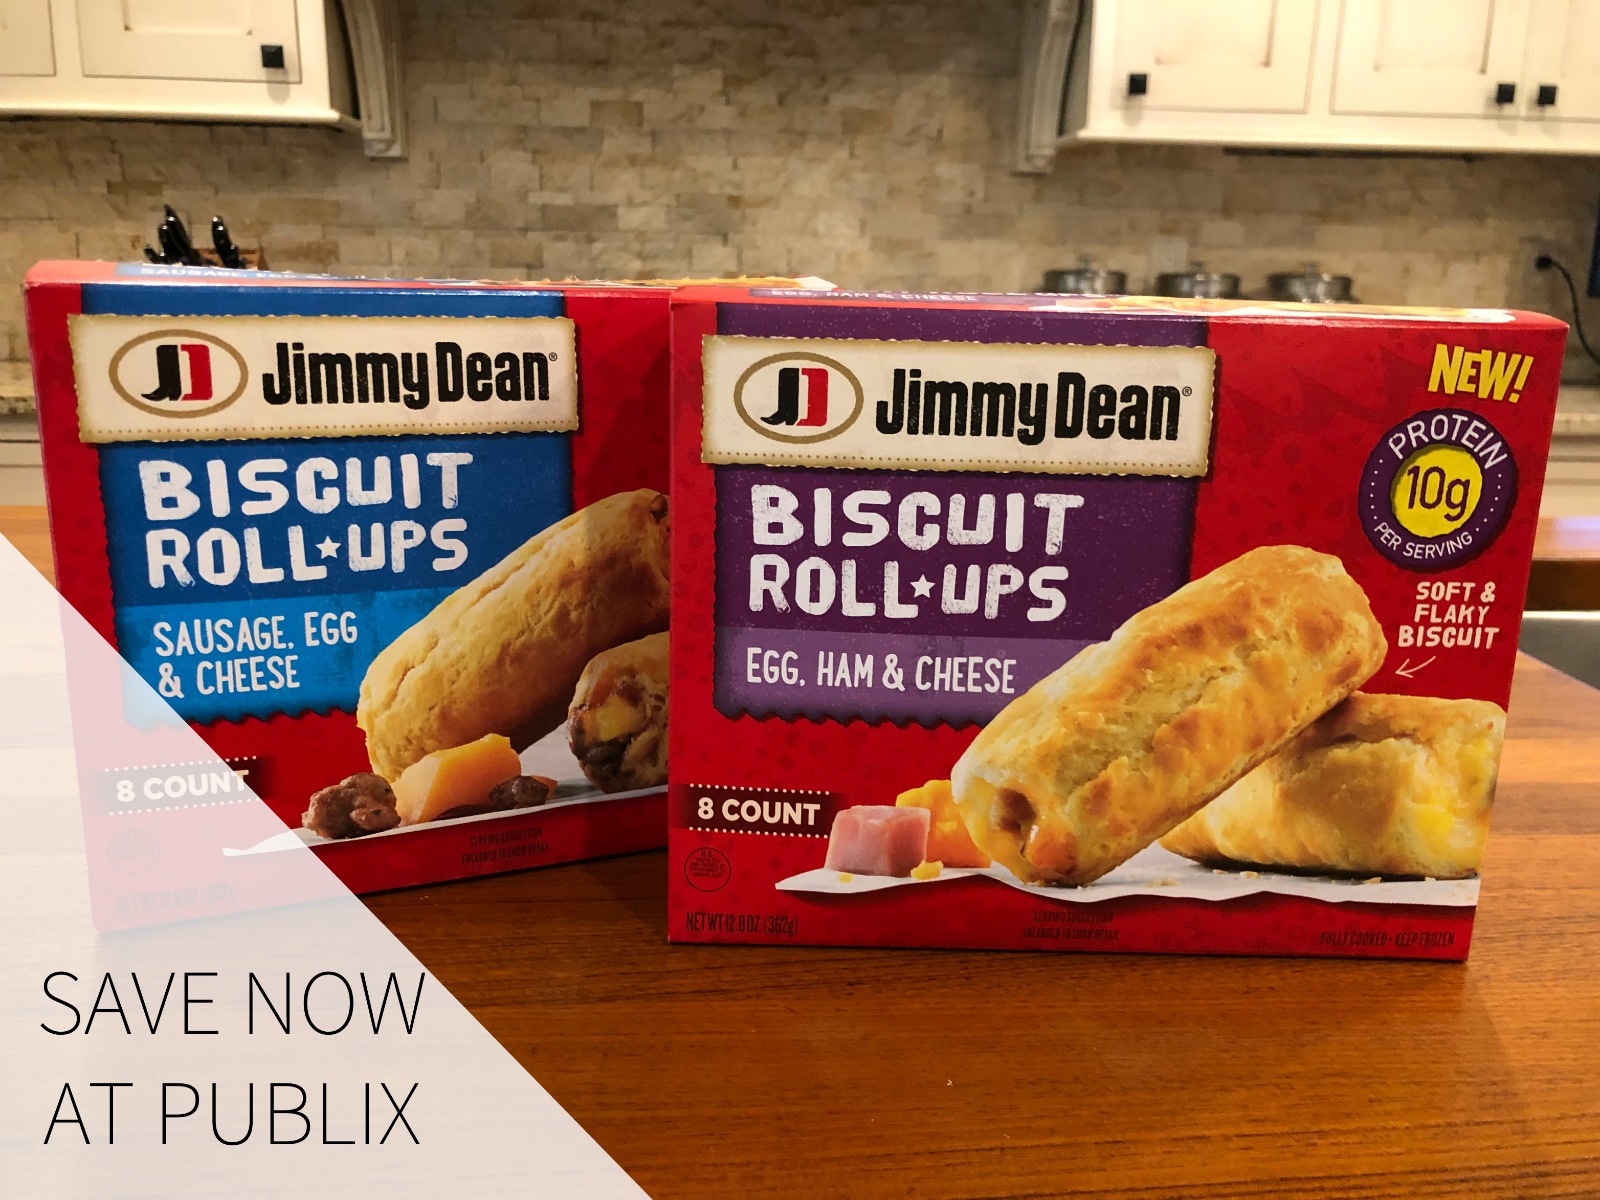 Super Deal On NEW Jimmy Dean Biscuit Roll-Ups Available Now At Publix on I Heart Publix